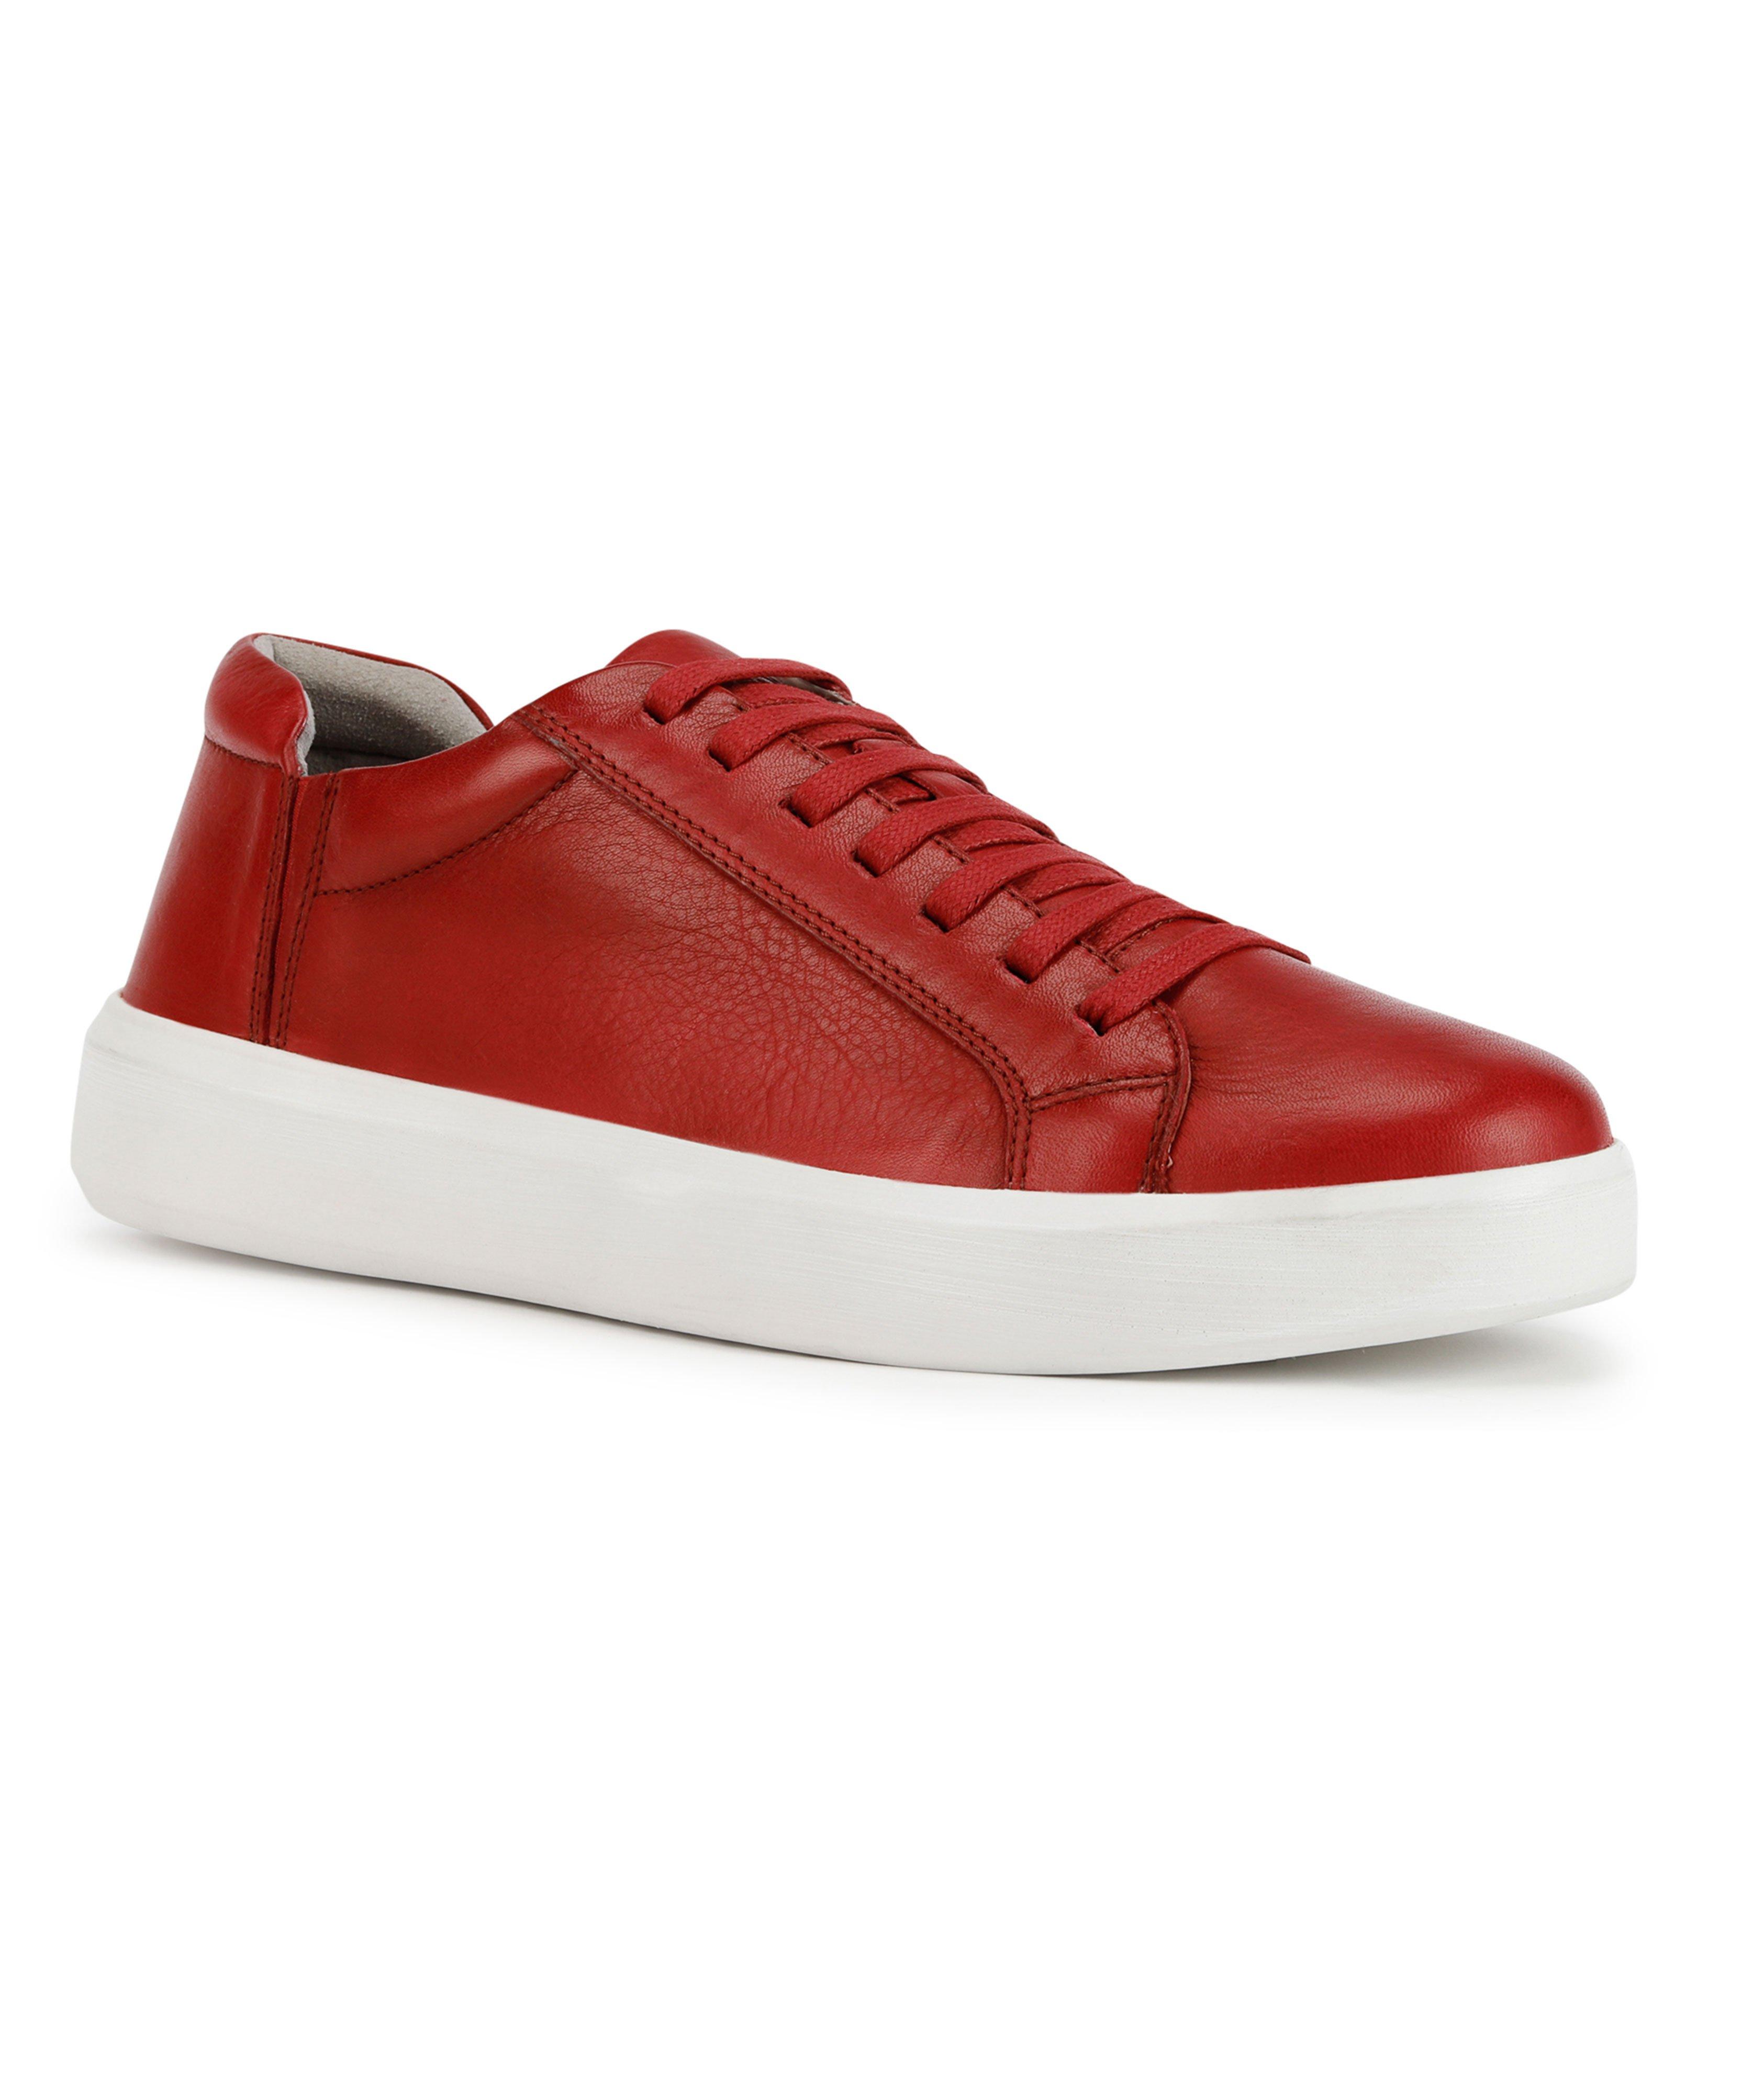 Velletri Leather Sneakers image 0